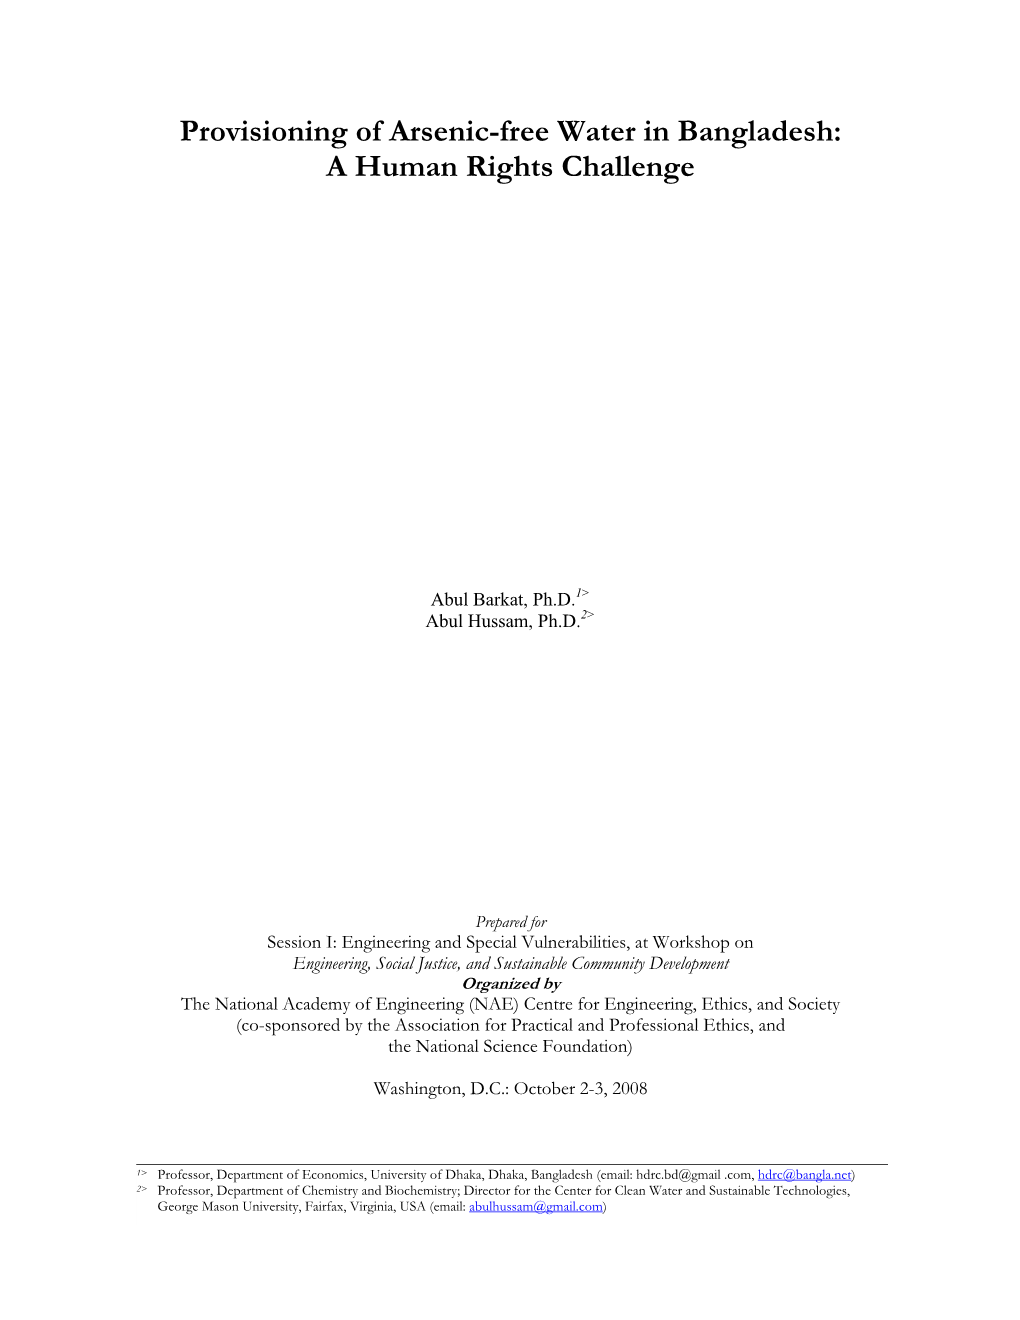 Provisioning of Arsenic-Free Water in Bangladesh: a Human Rights Challenge